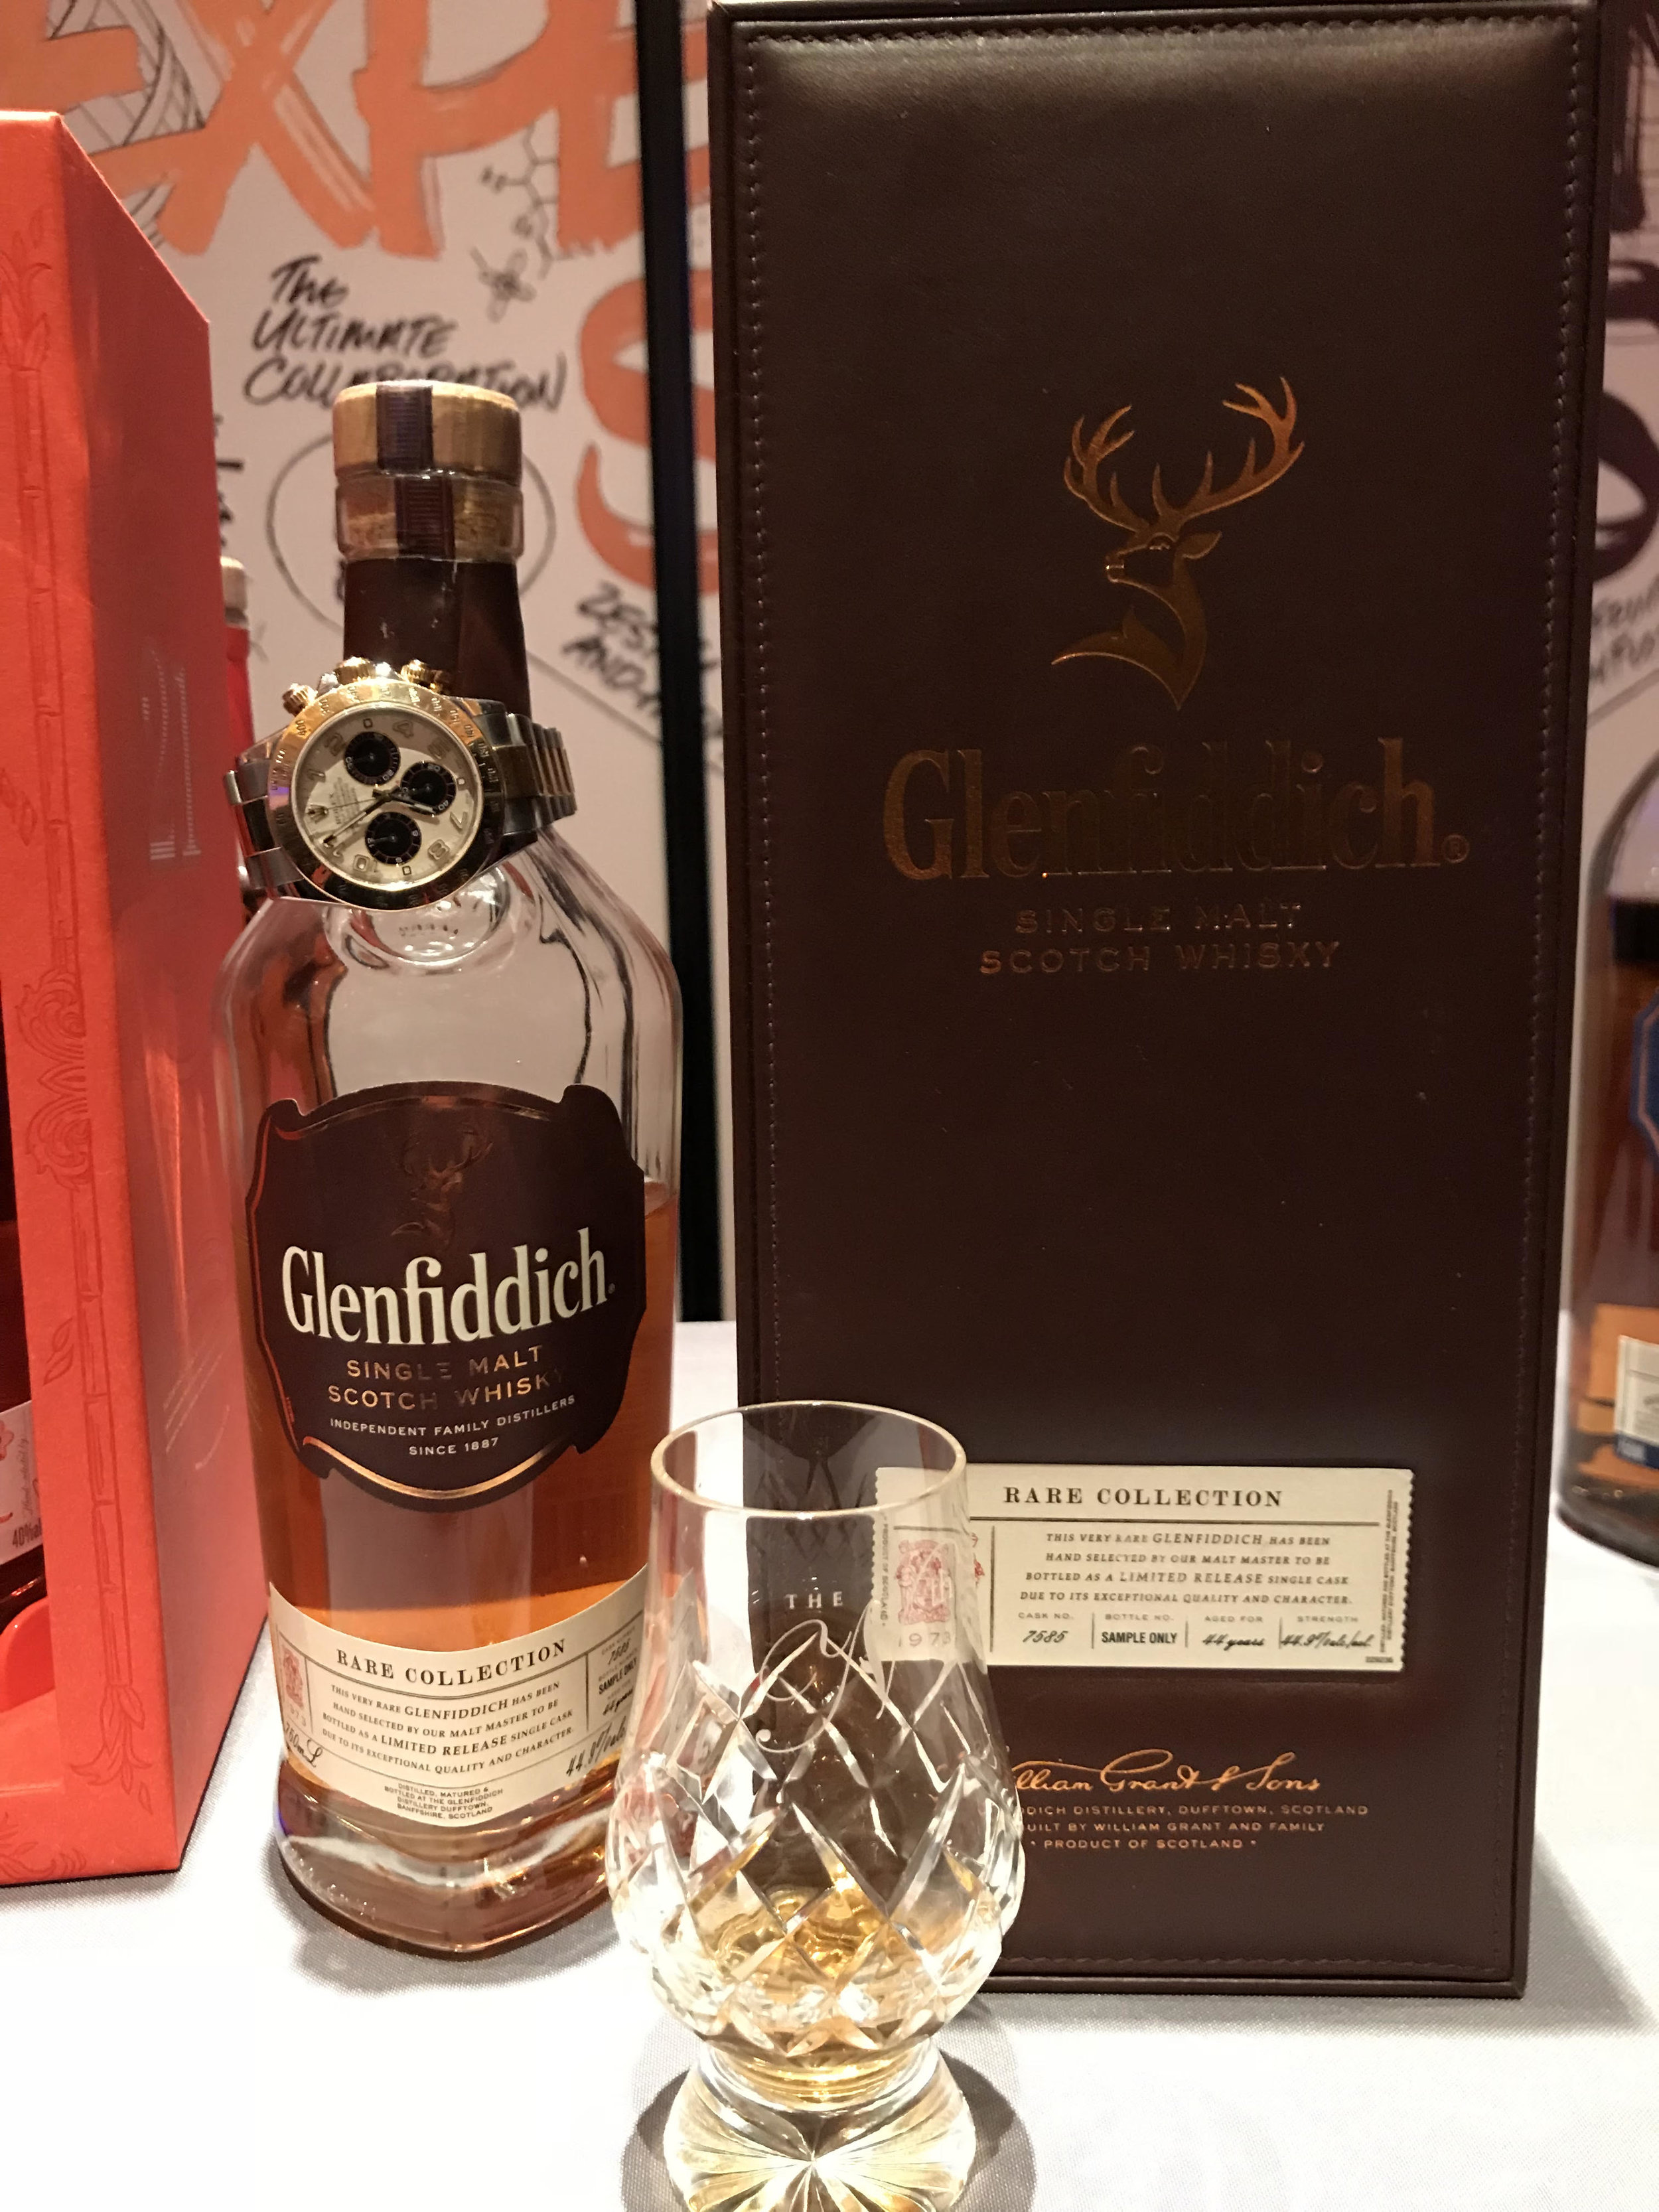 Glenfiddich Rare Collection - 1973 44 Years Old